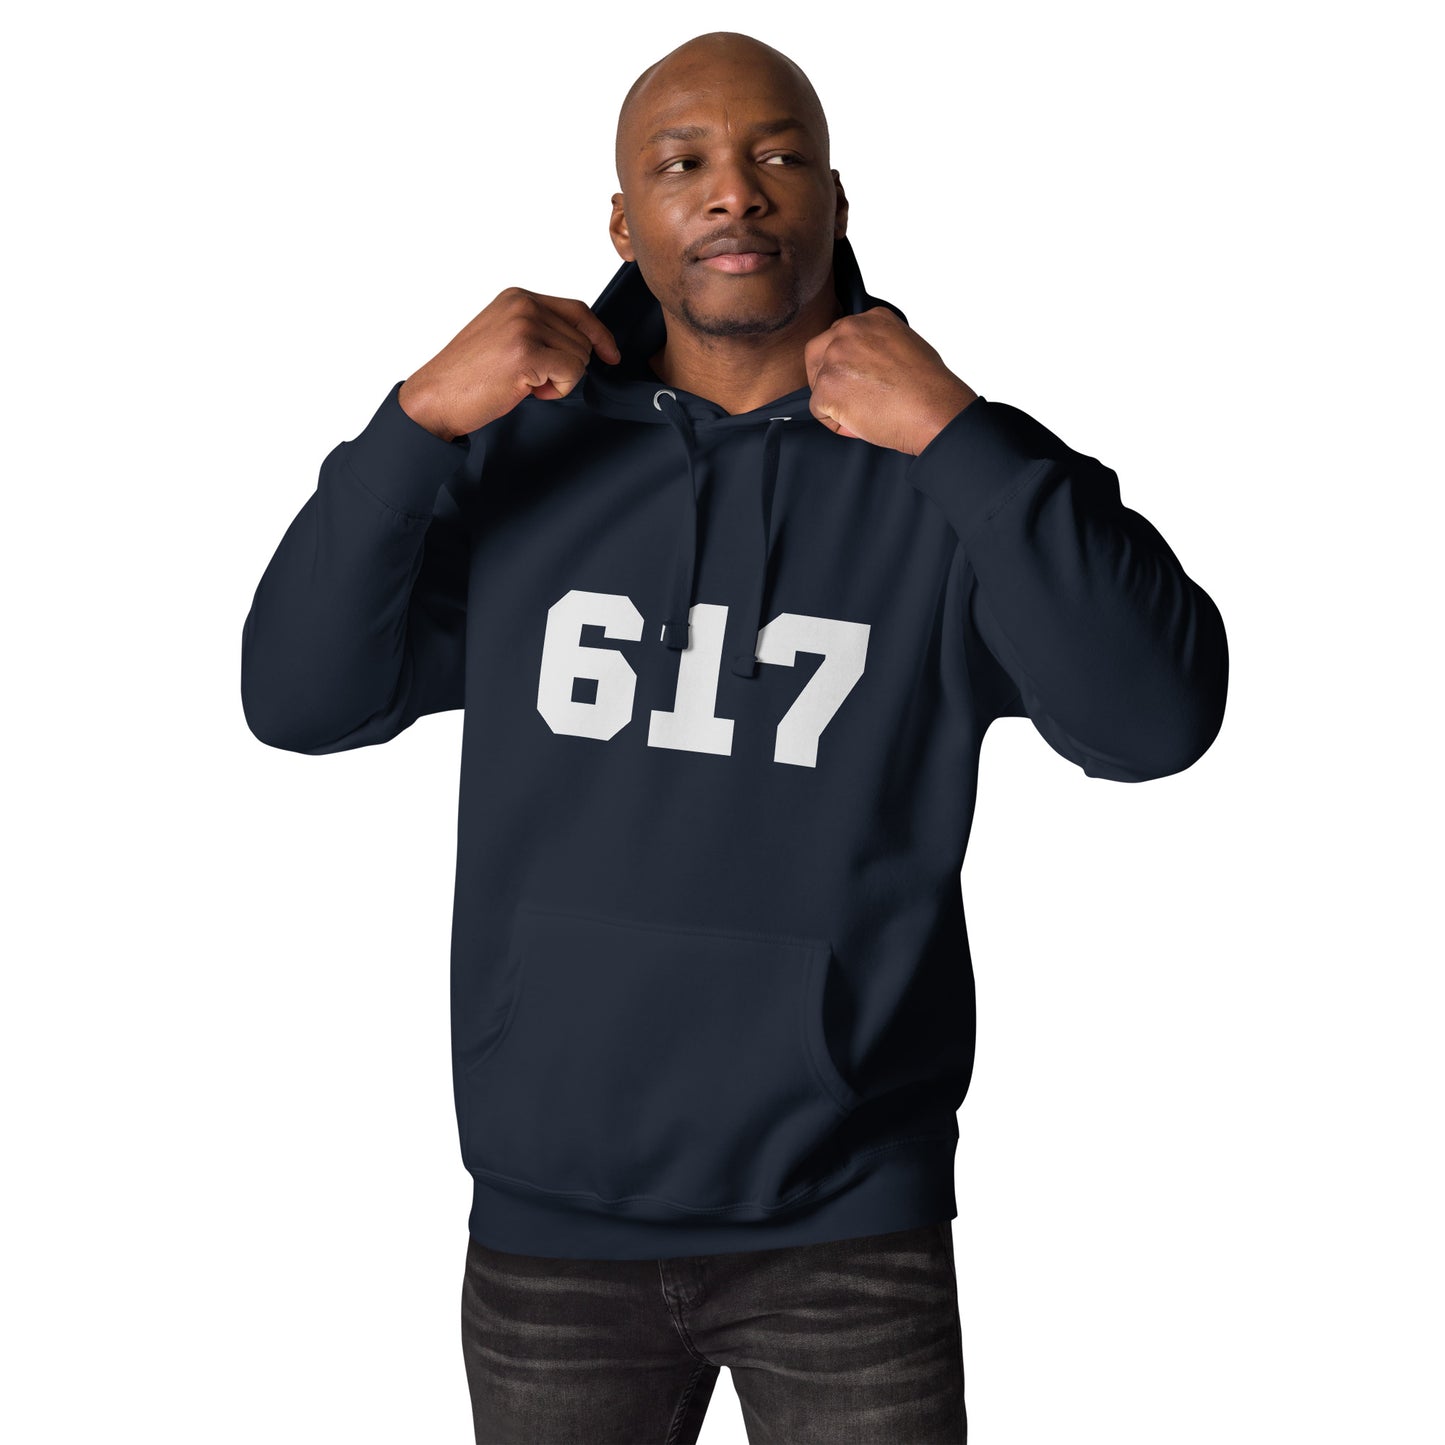 617 New England Strong Hoodie